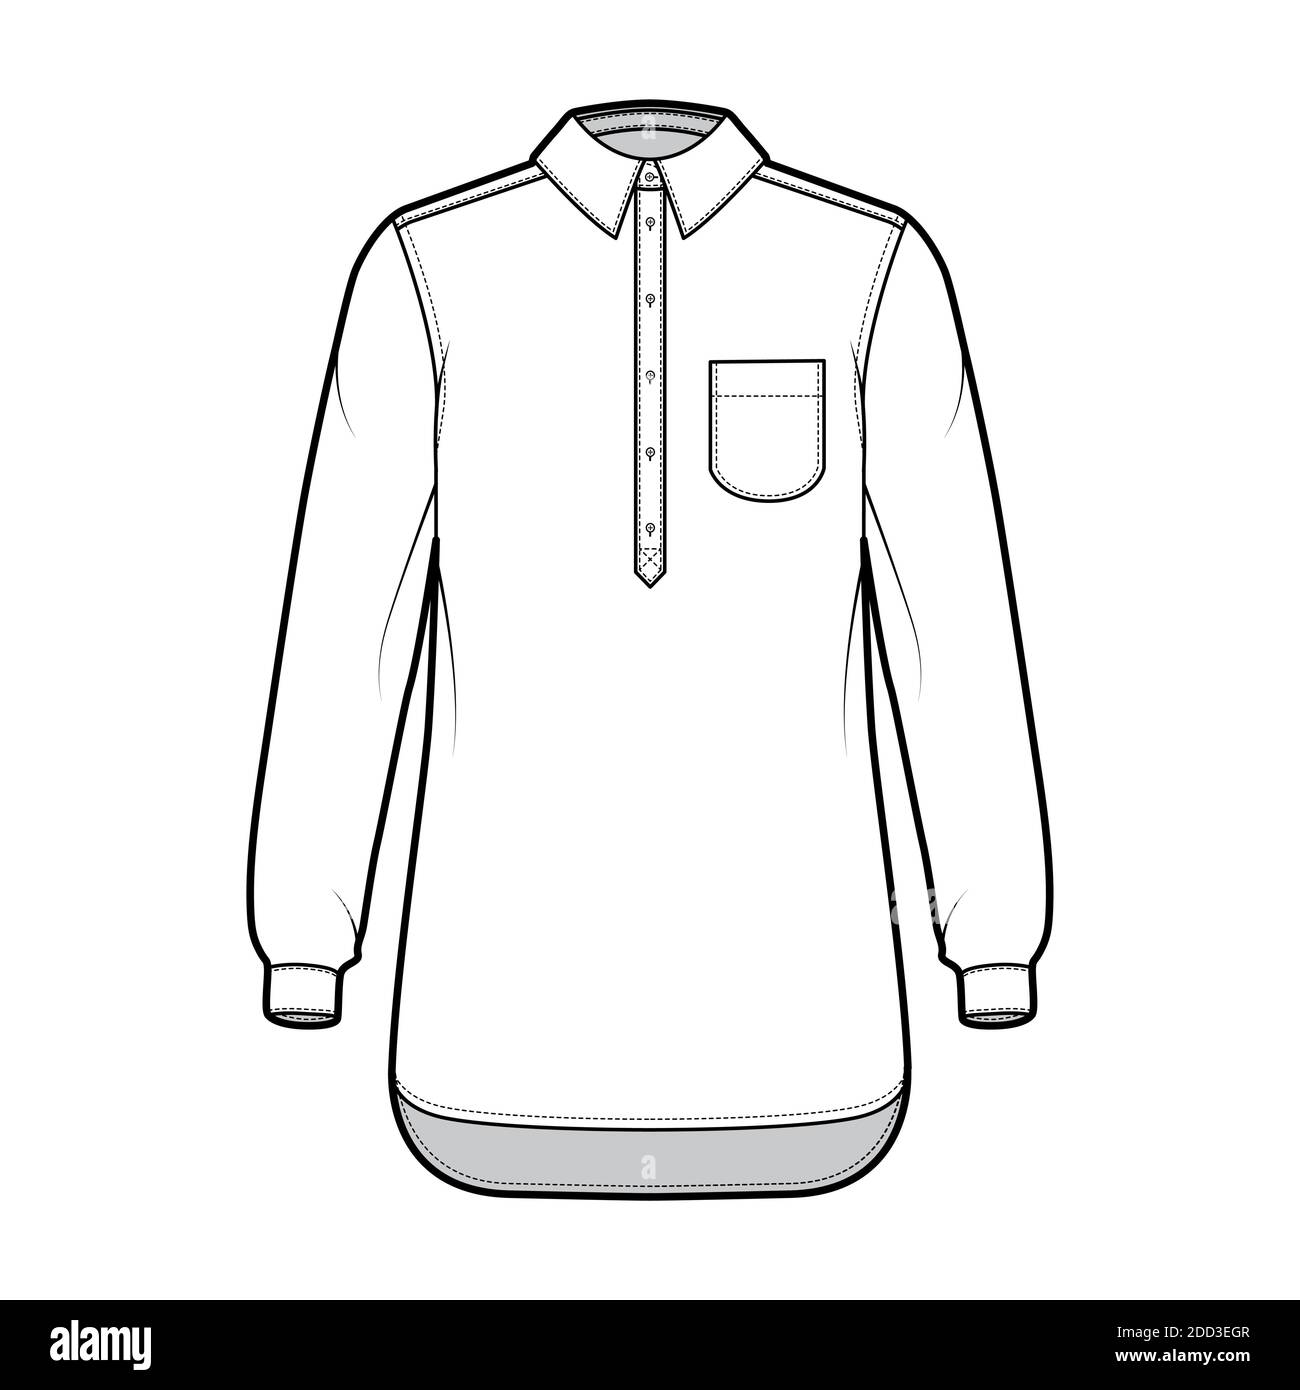 Rounded notch collar neckline placket clothes Vector Image